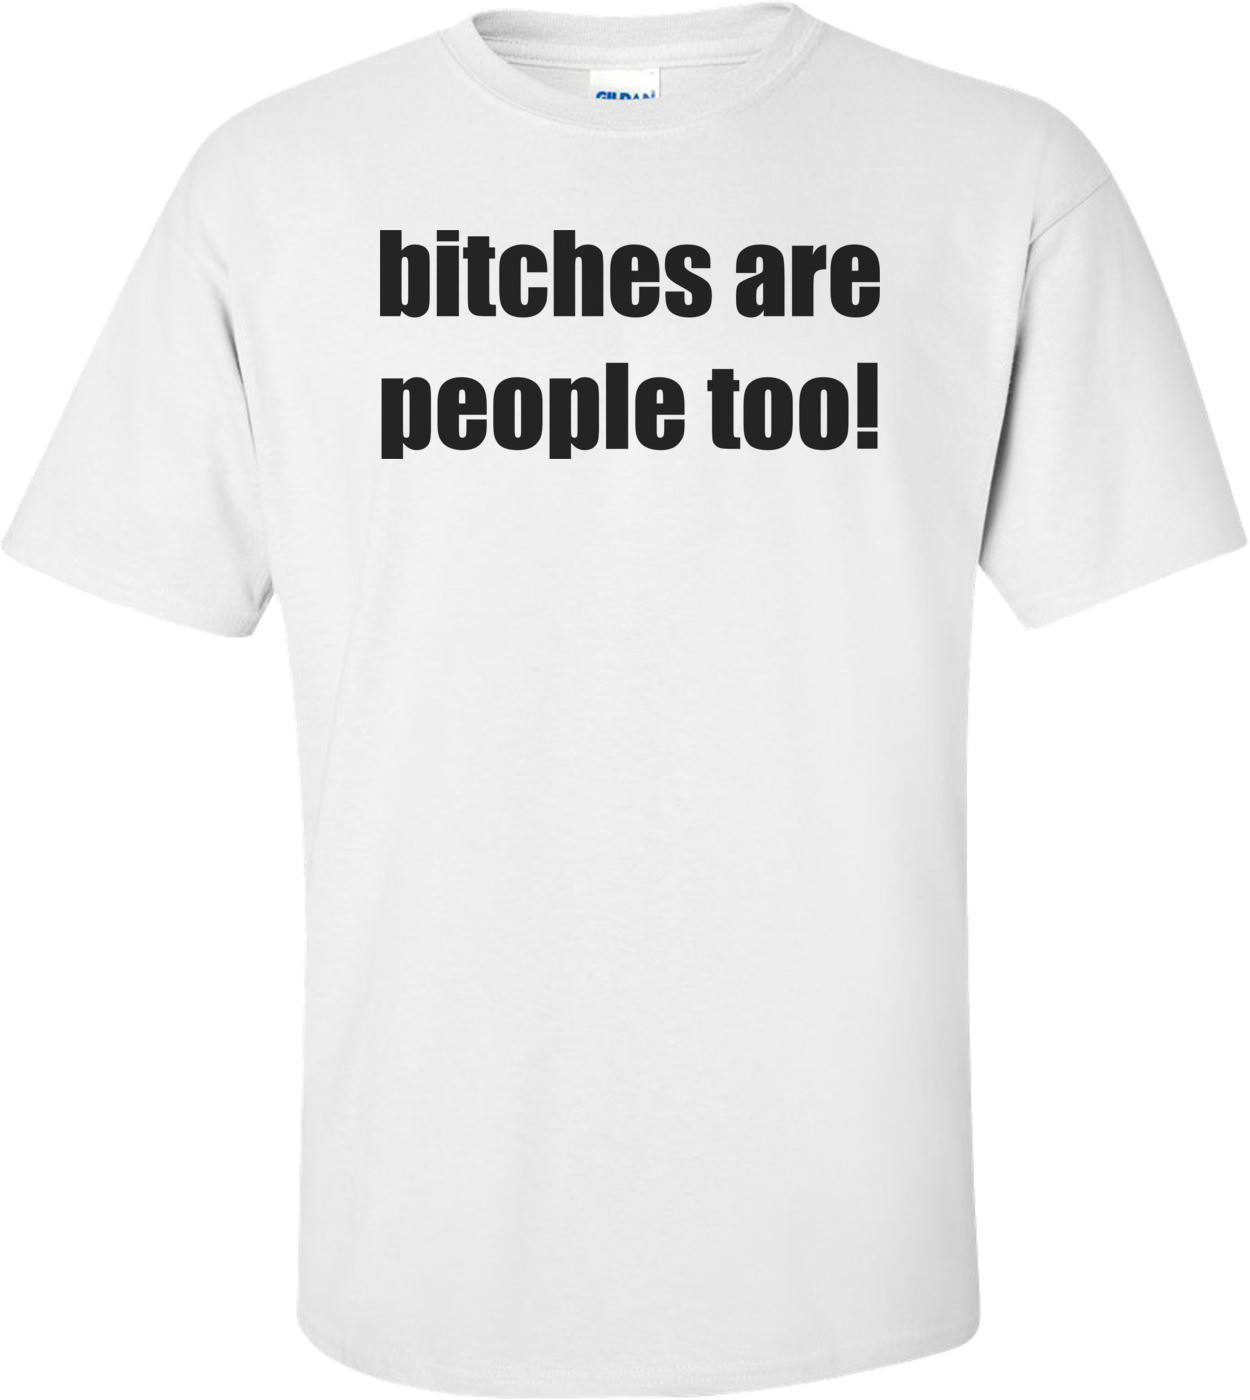 bitches are people too! Shirt